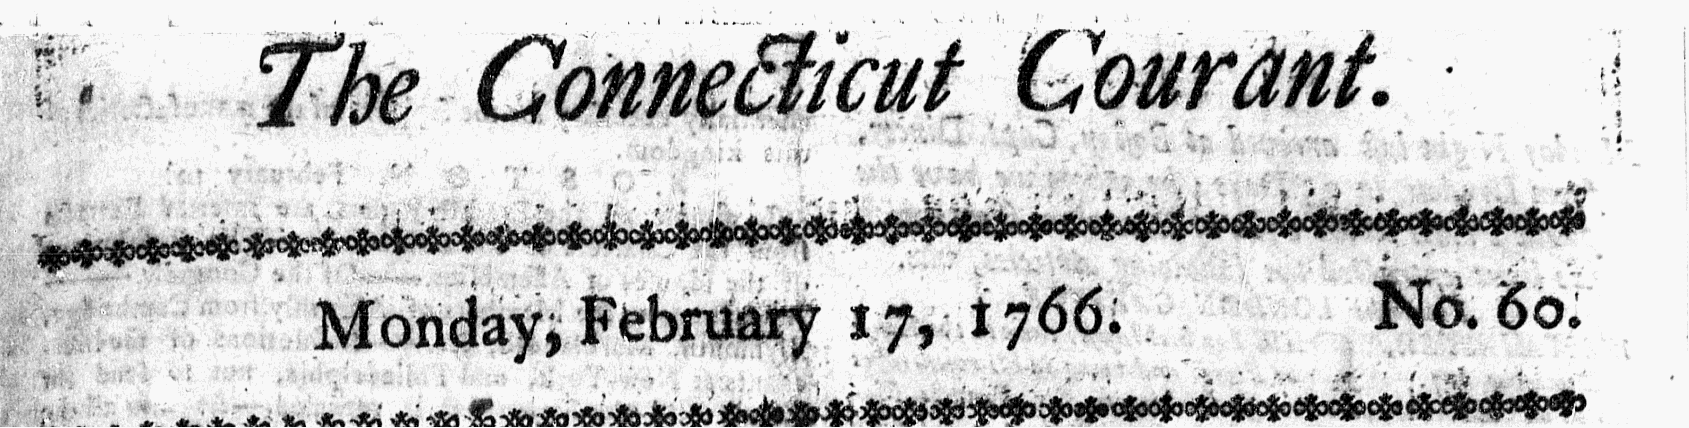 Feb 19 - Masthead for Connecticut Courant 2:17:1766